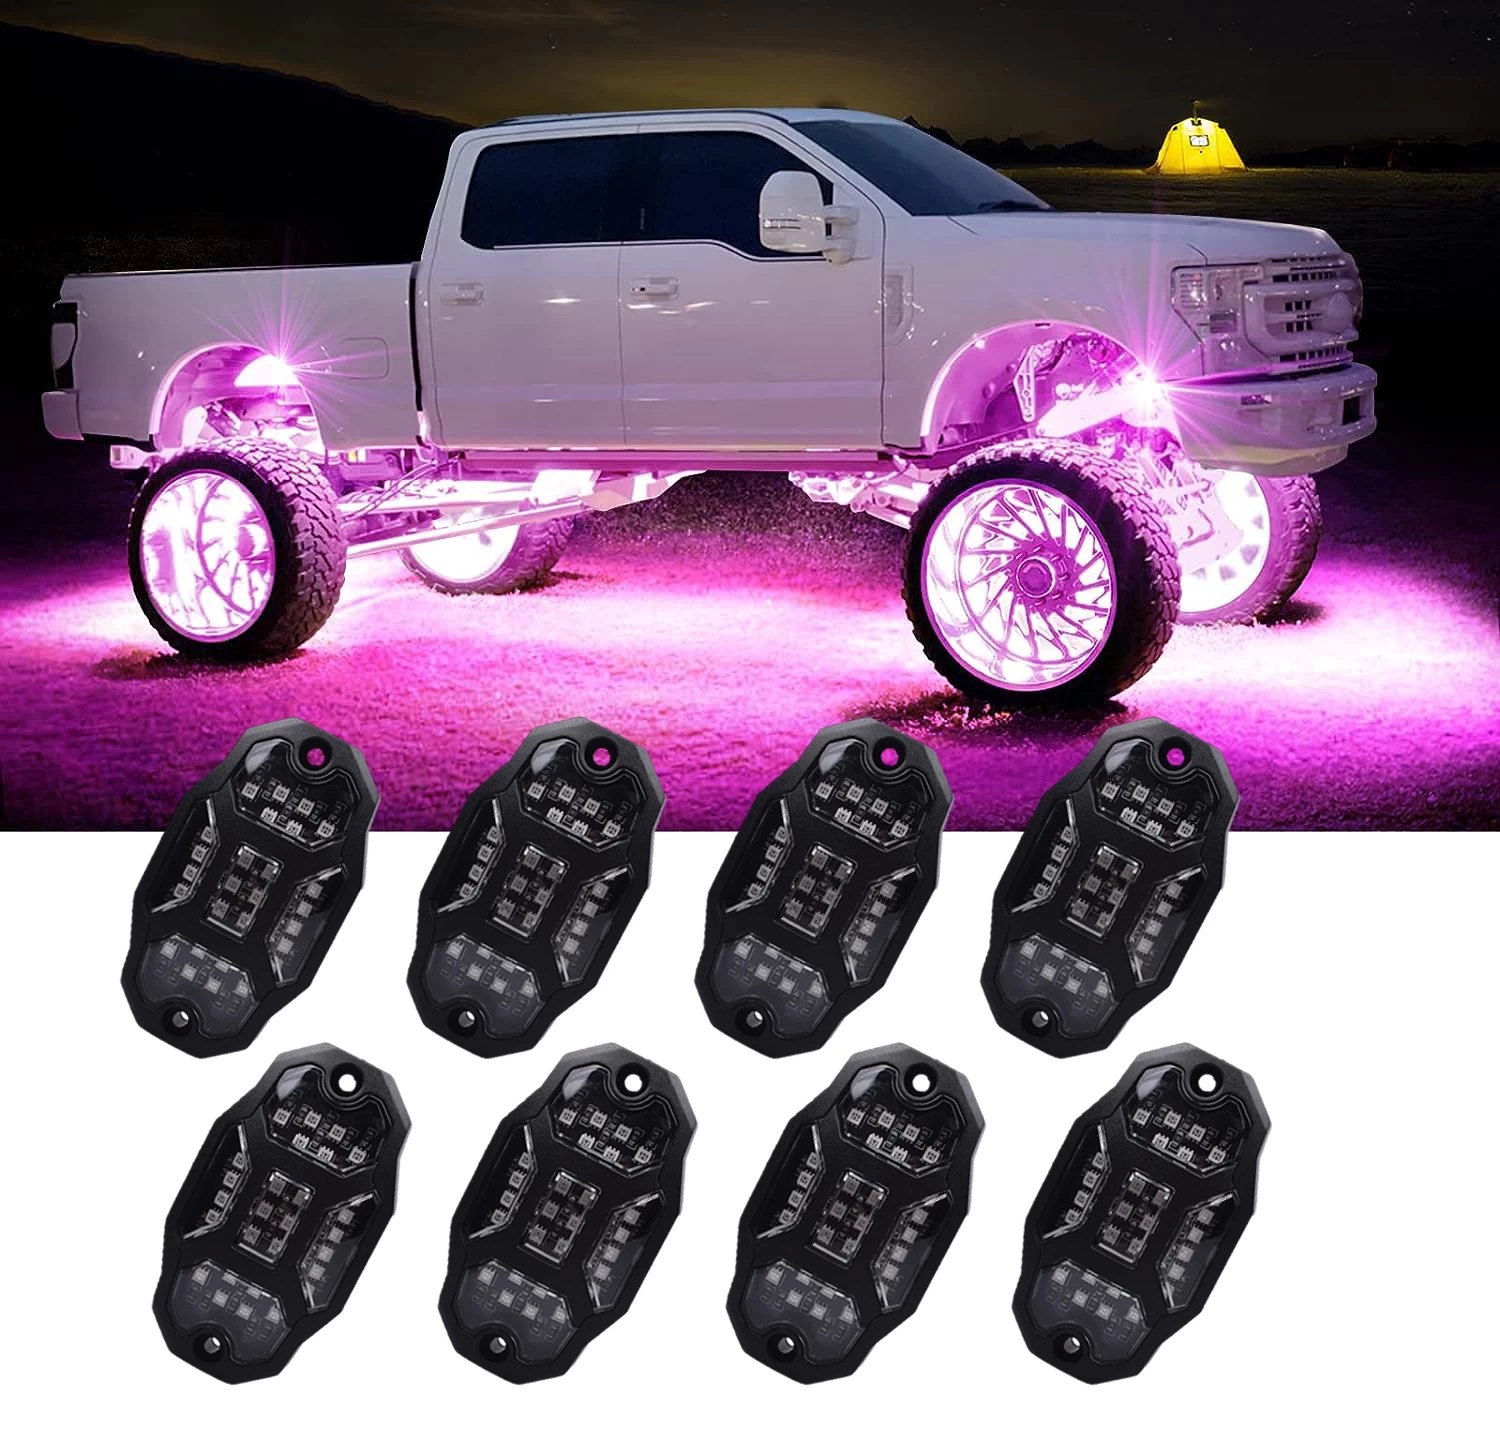 China Undergolw Light For Car Jeep Off-Road Truck Boat Bluetooth APP Control 4/6/8 In 1 RGB LED Rock Lights Chassis Light Music Sync - COPY - bav4w2 fabricante